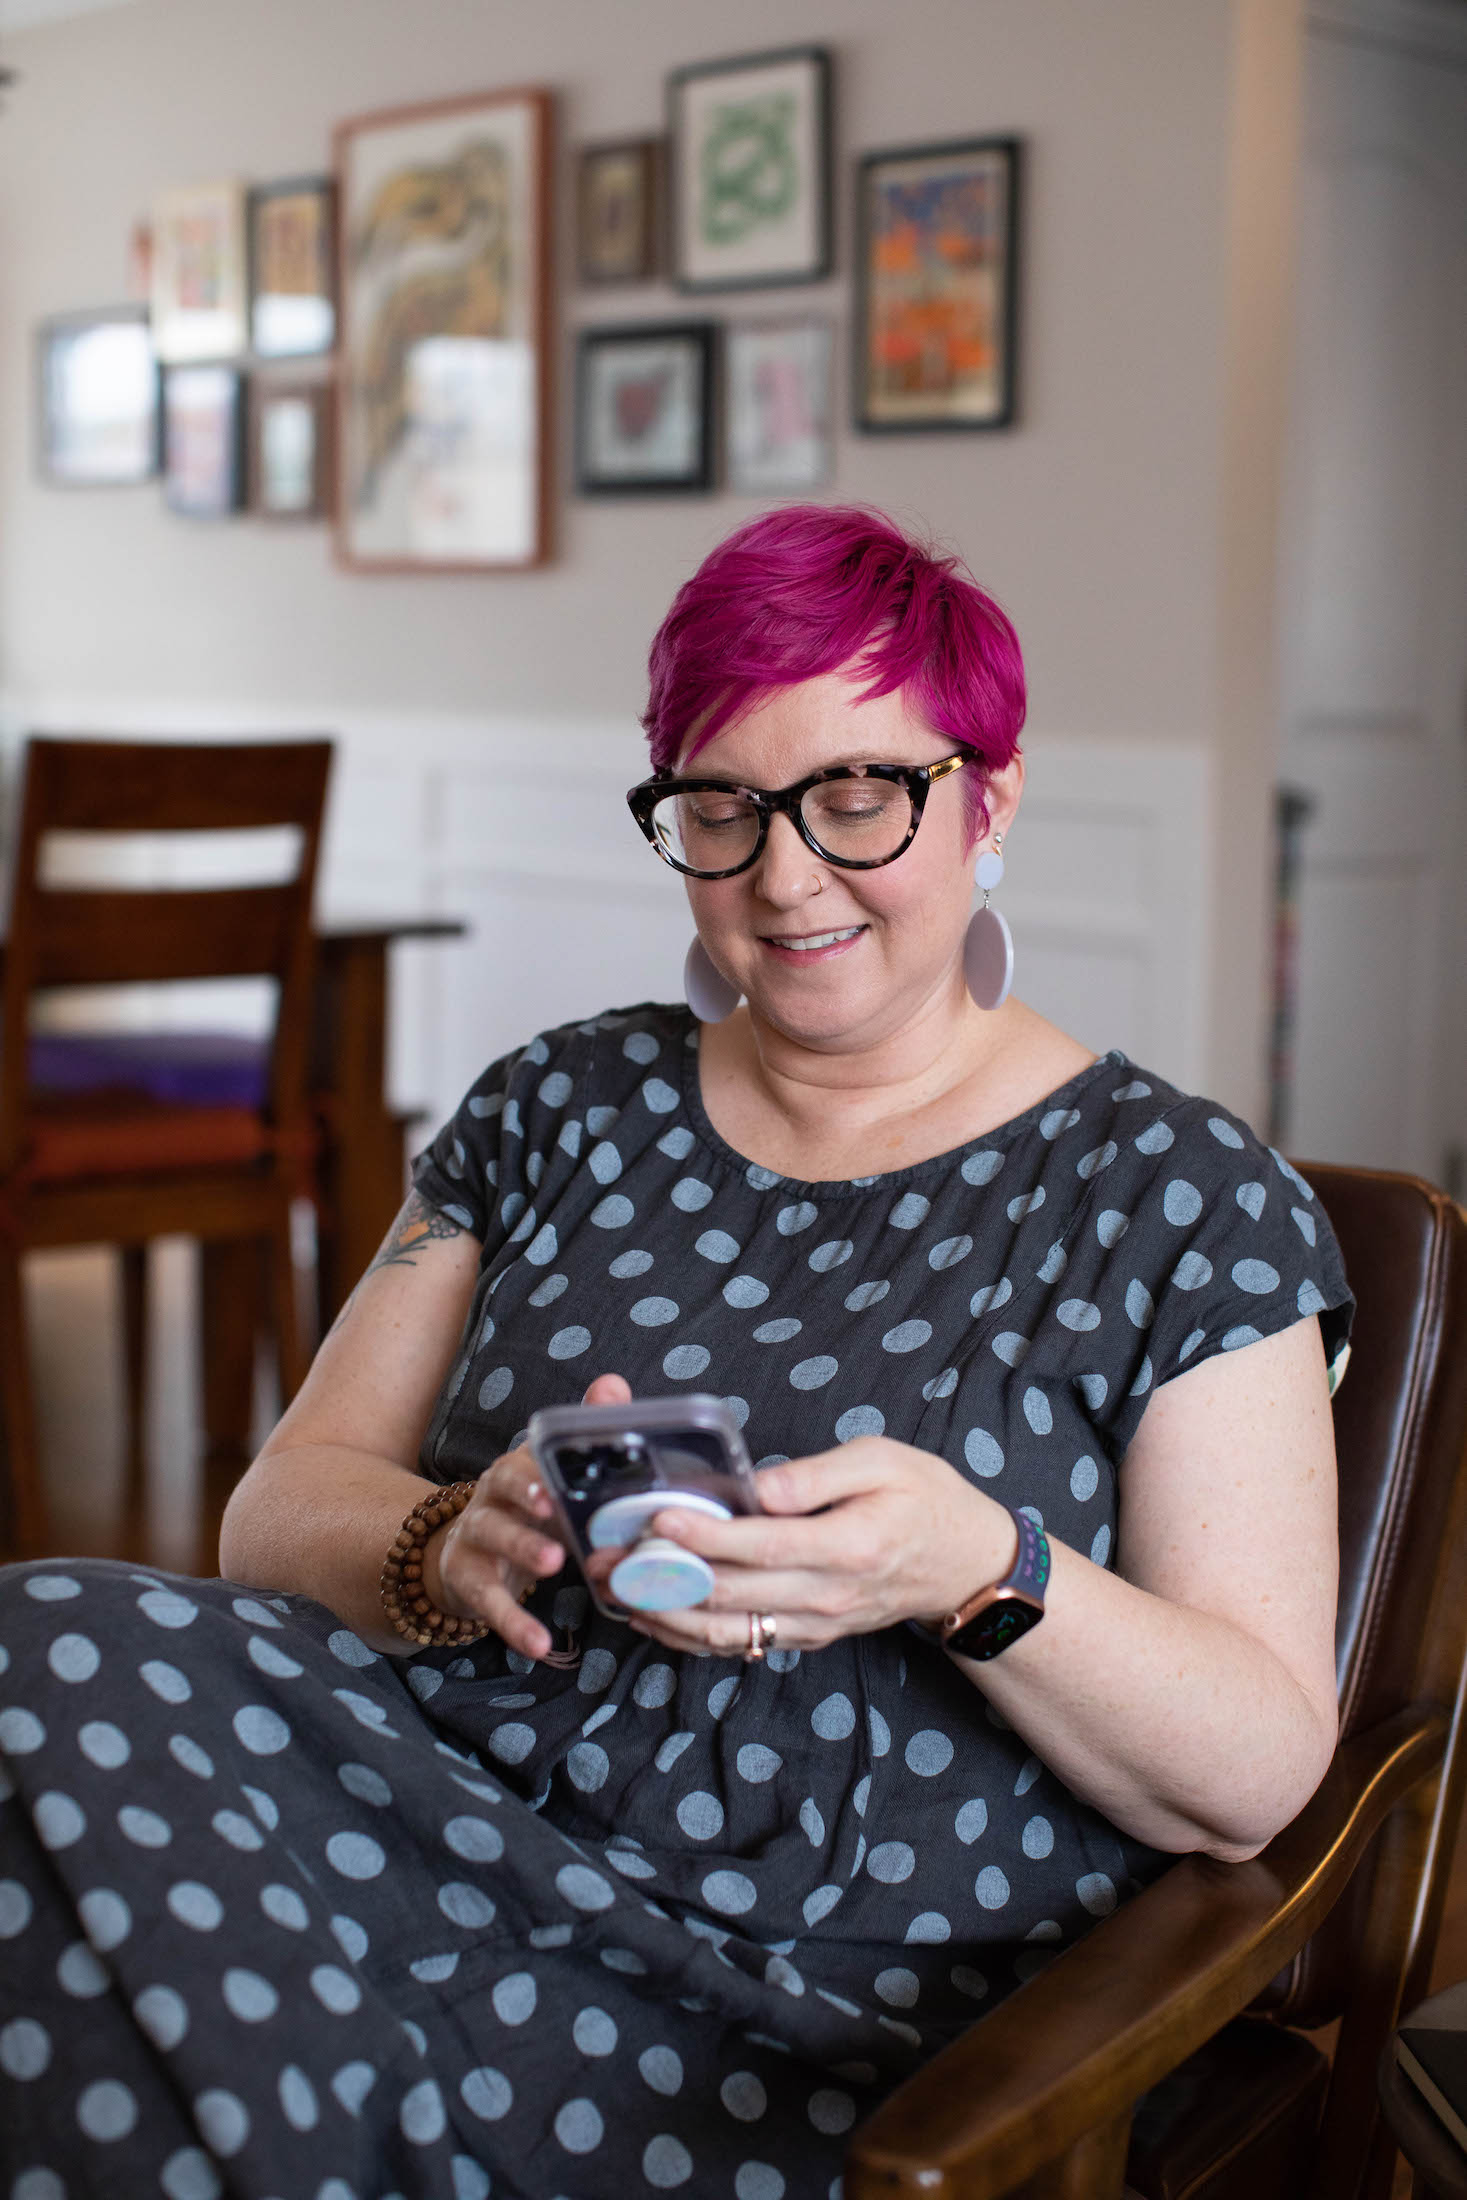 White woman with pink pixie cut and glasses sits on a chair in her living room, looking at her phone